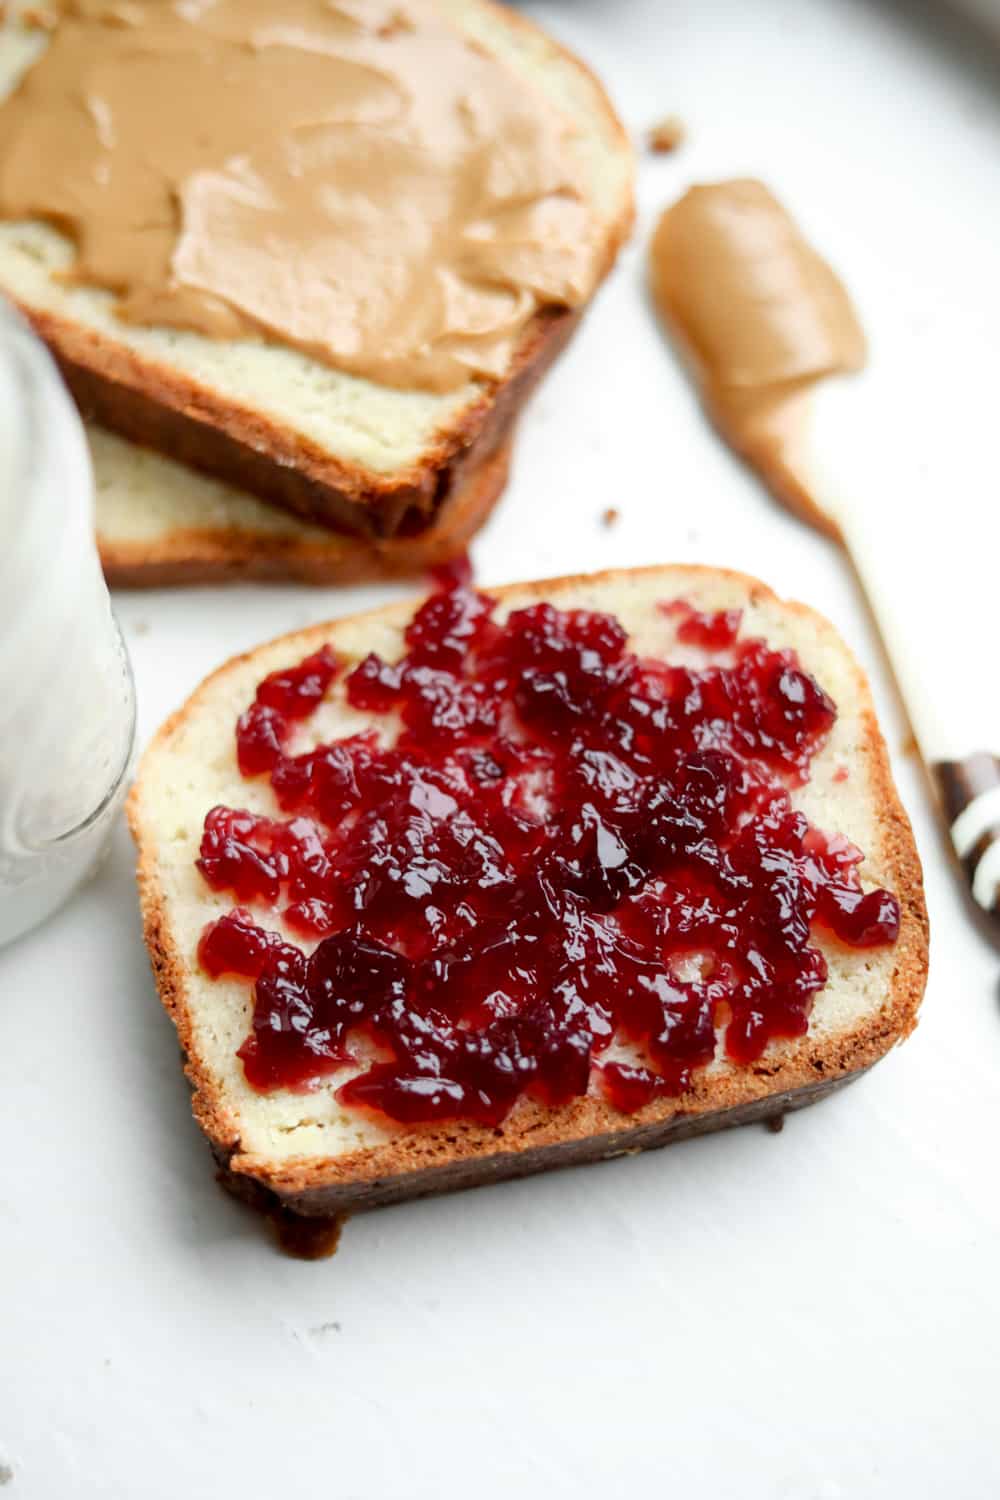 A slice of bread with jelly on it.